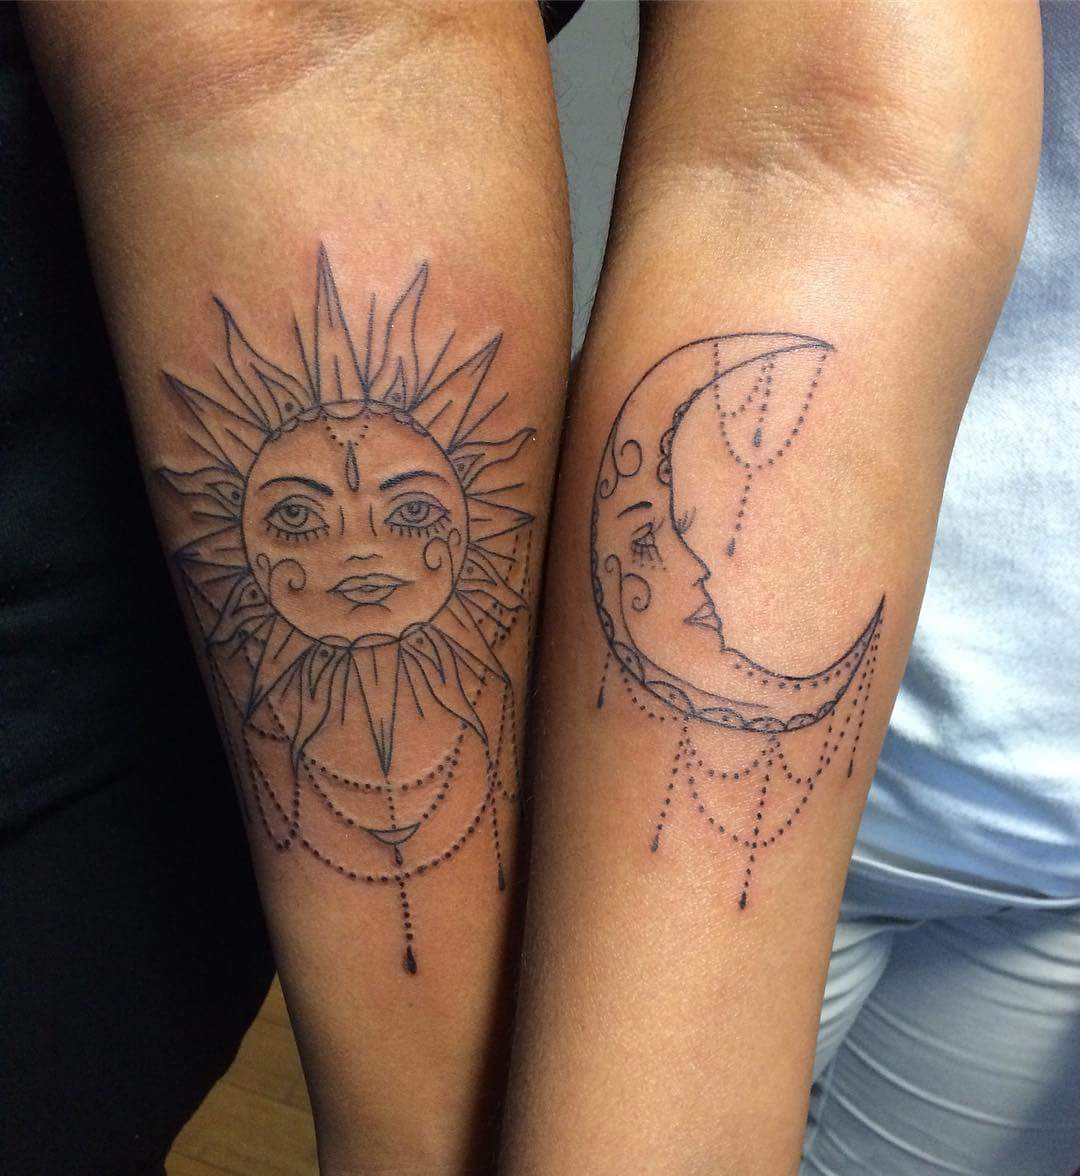 60 Cool Sister Tattoo Ideas to Express Your Sibling Love - Blurmark